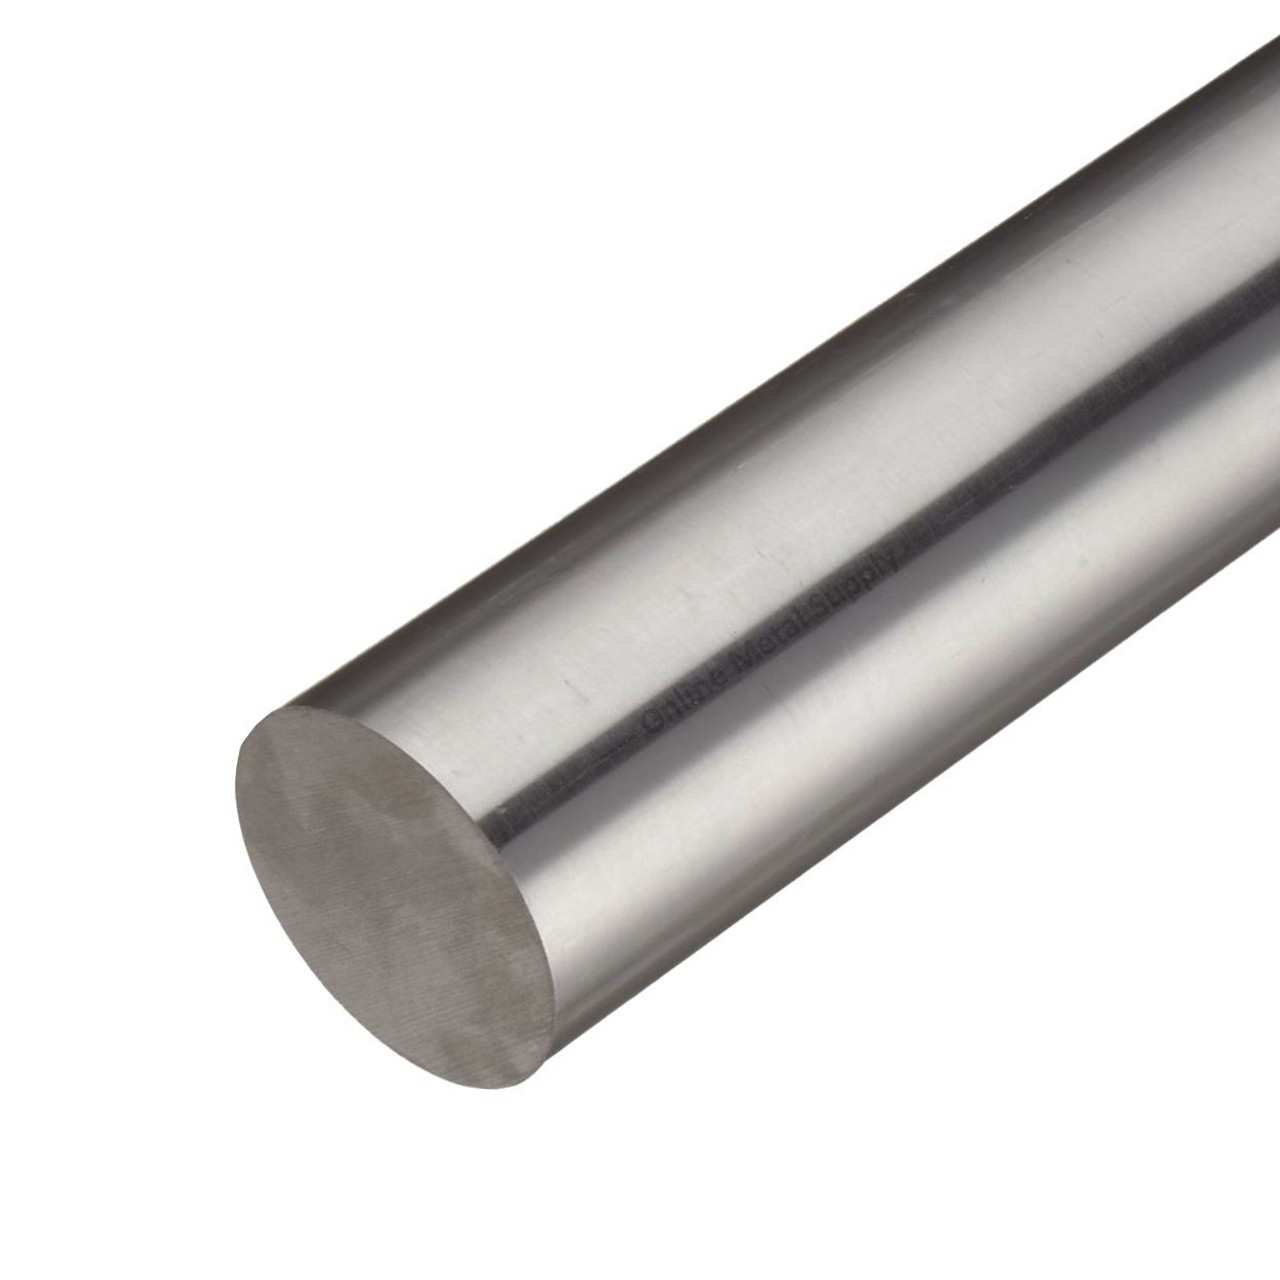 1.125 (1-1/8 inch) x 8 inches, 17-4 Cond A Stainless Steel Round Rod, Cold Finished